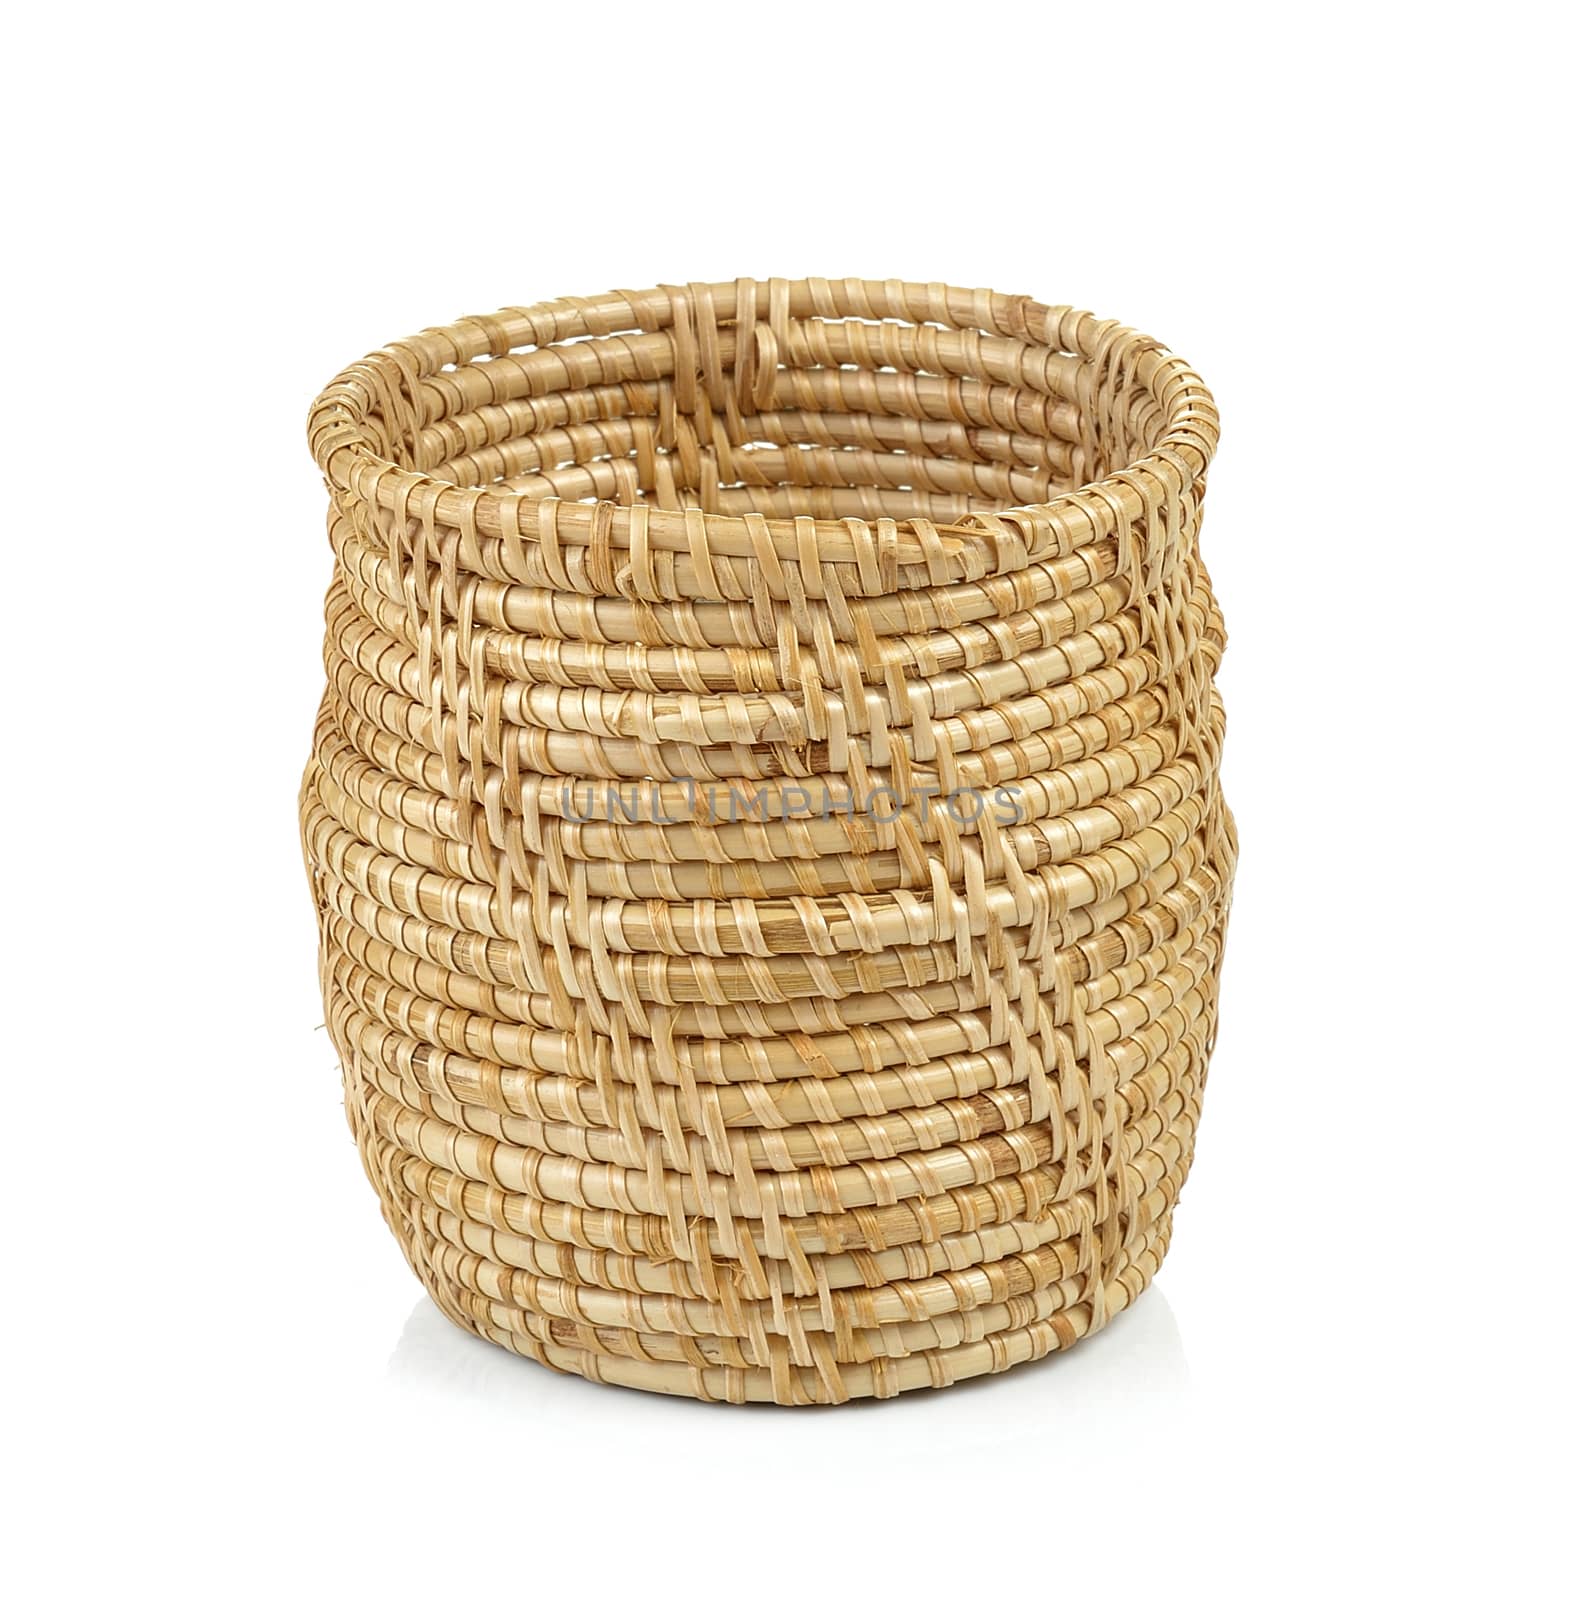 wood basket pot on isolated background by sommai